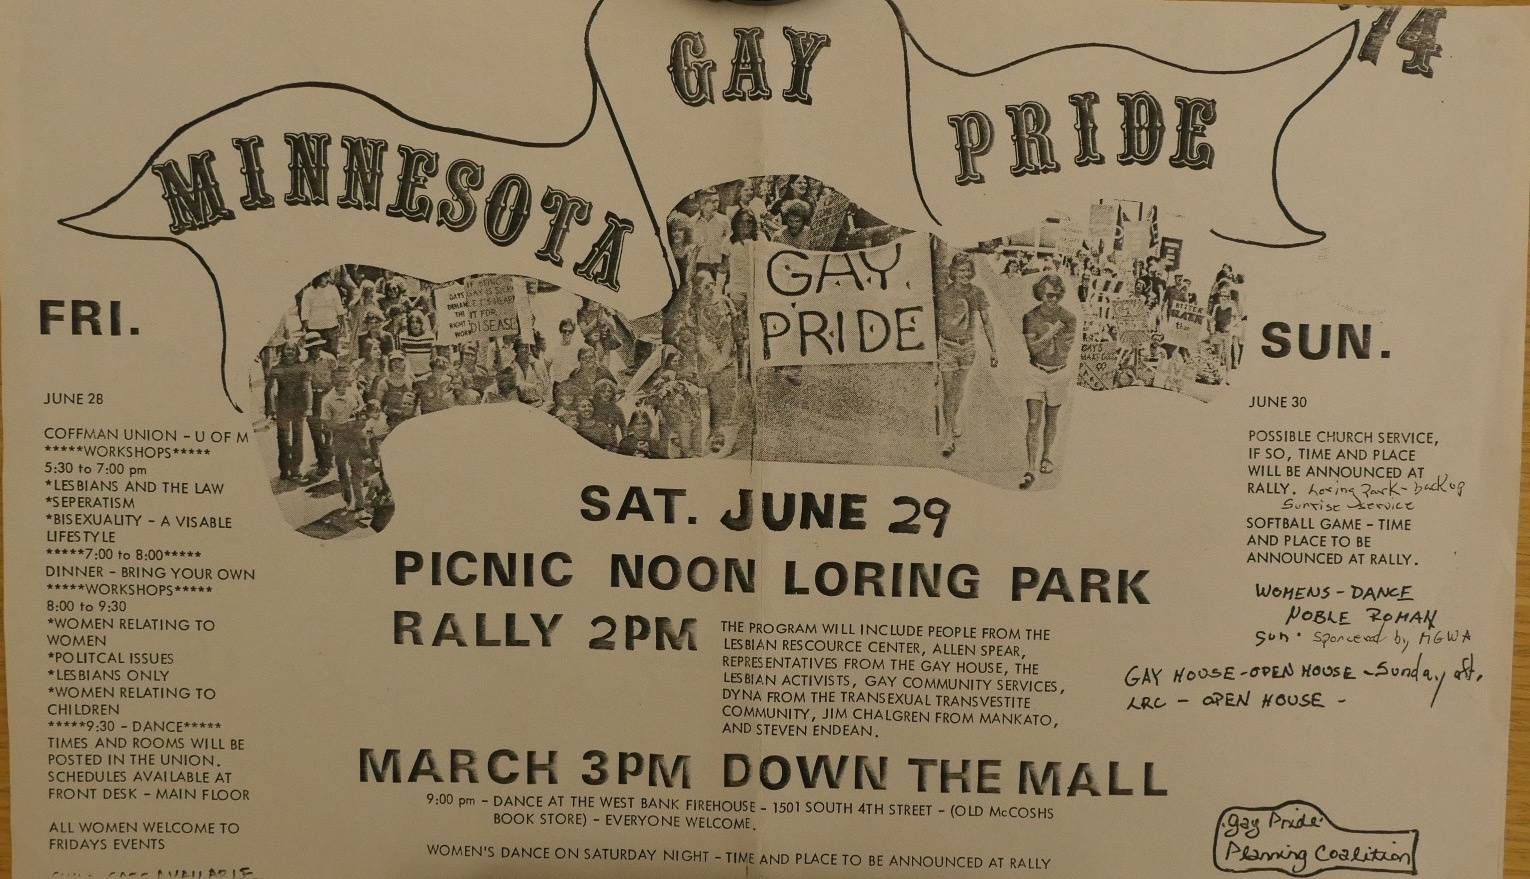 An early Pride Guide for a celebration in Minneapolis. | Photo courtesy of The Jean-Nickolaus Tretter Collection in Gay, Lesbian, Bisexual and Transgender Studies at the University of Minnesota